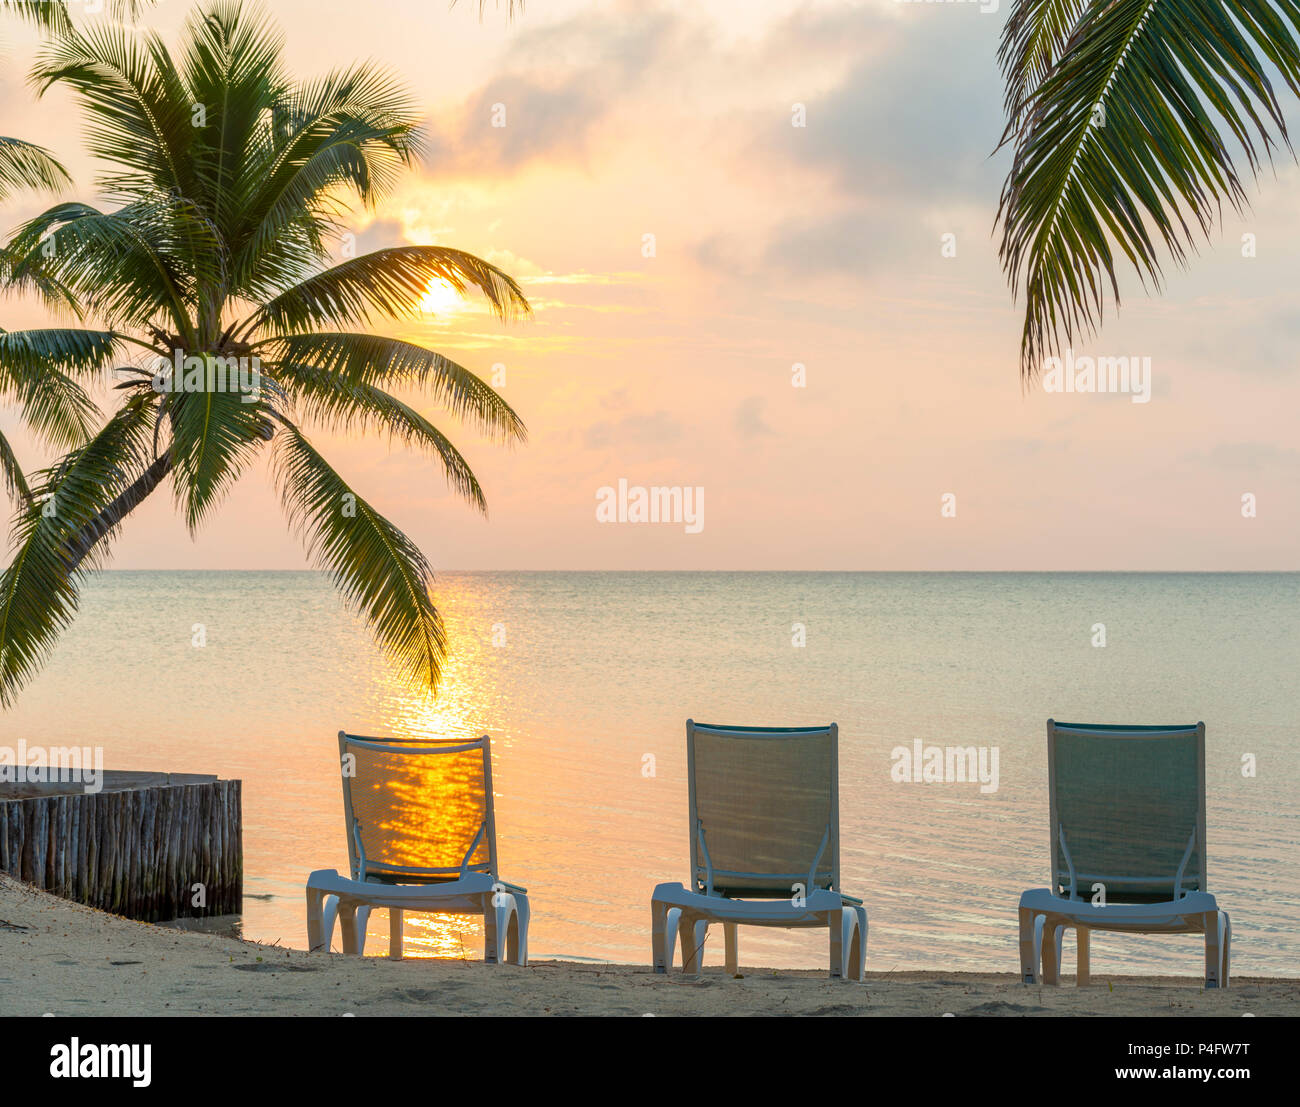 Sunrise over the ocean on dream beach vacation with palmtrees and deckchairs Stock Photo